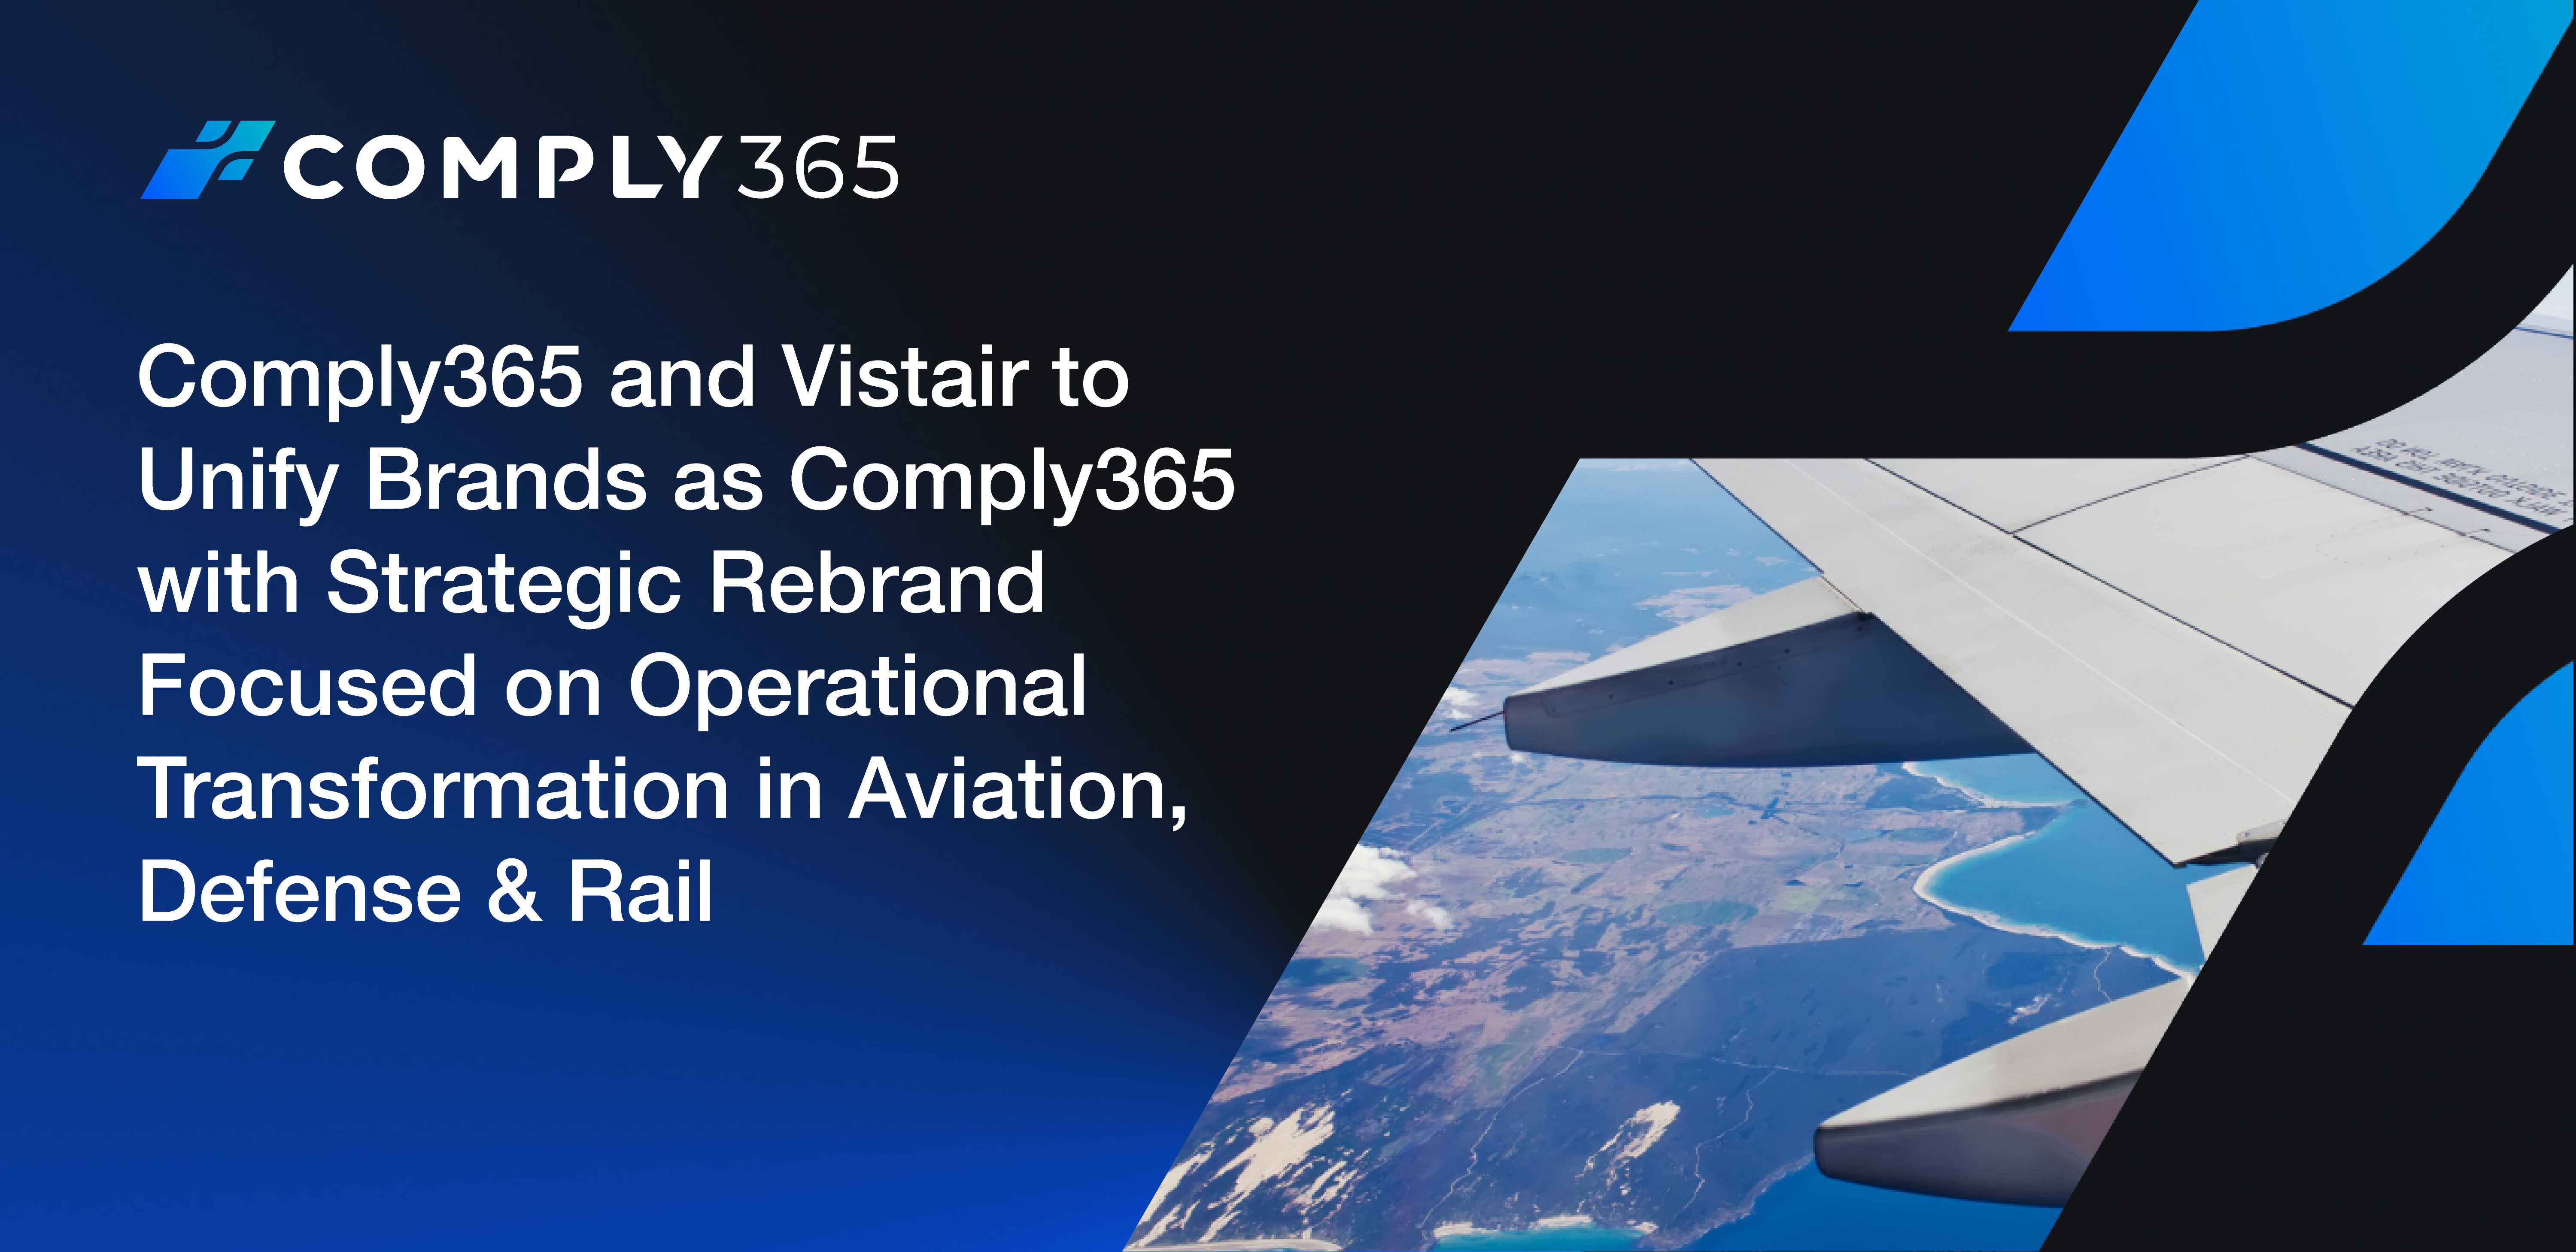 Comply365 and Vistair to Unify Brands as Comply365 with Strategic Rebrand Focused on Operational Transformation in Aviation, Defense & Rail